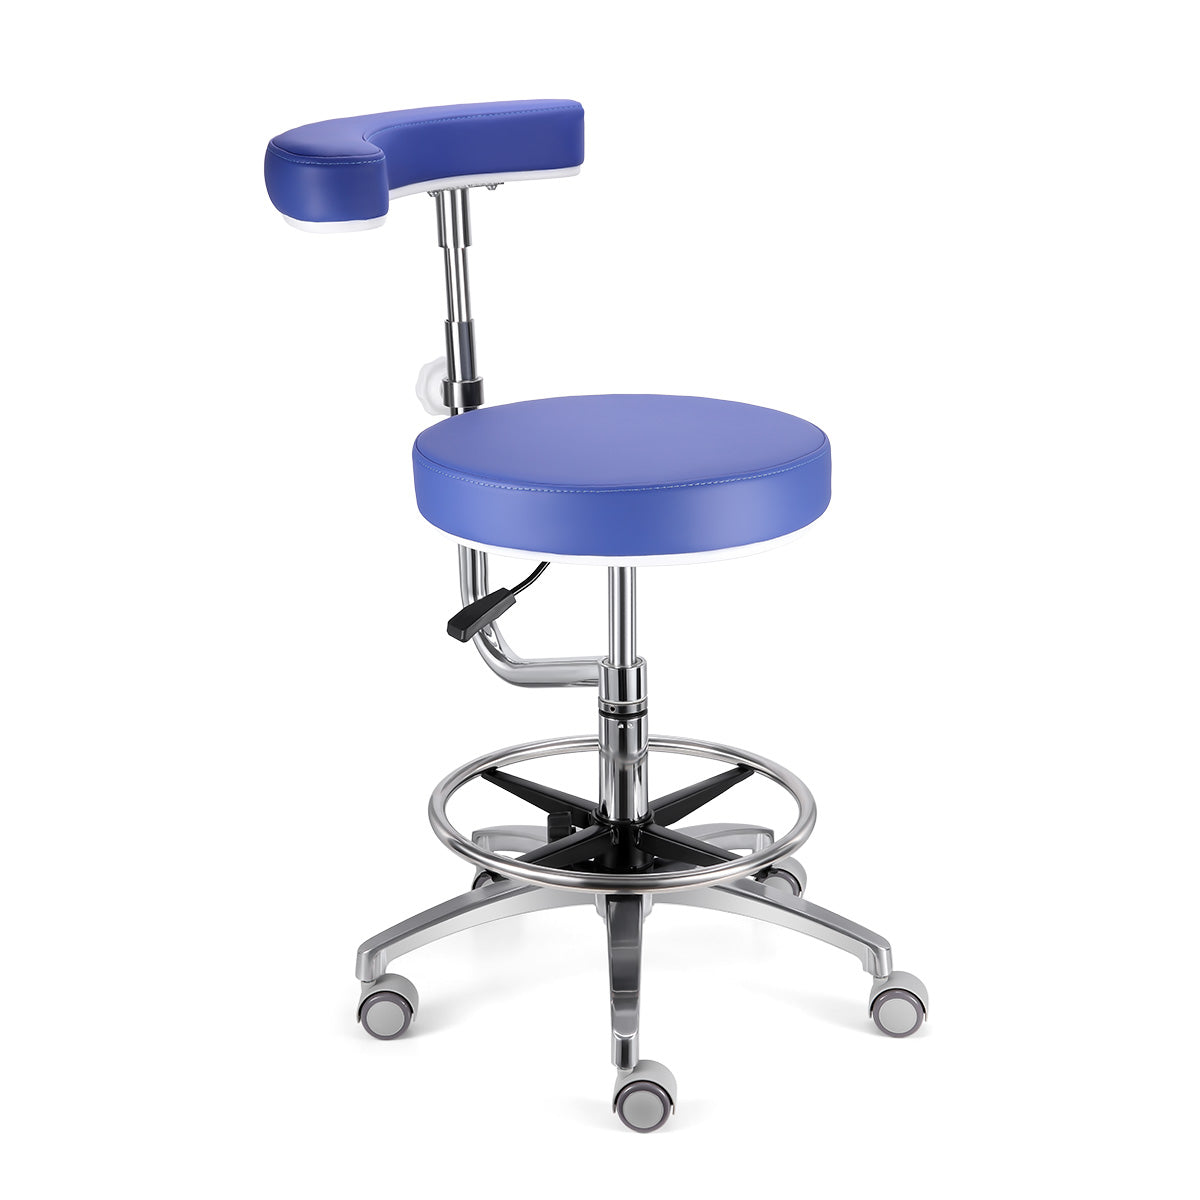 Medical Nurse Chair Doctor Stool With Backrest